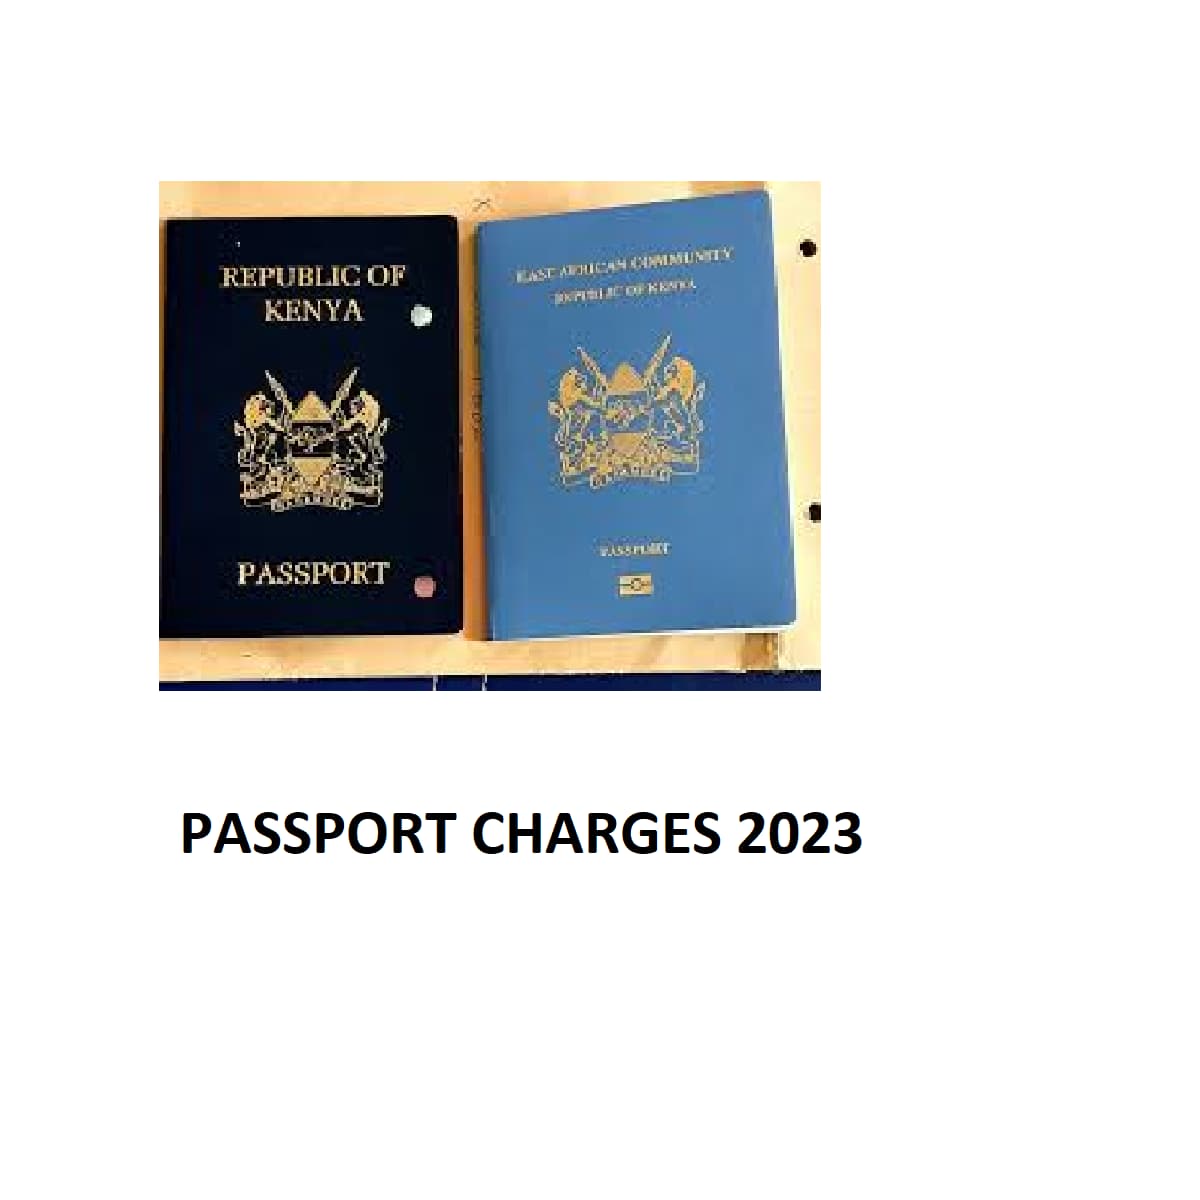 Passport Charges in Kenya